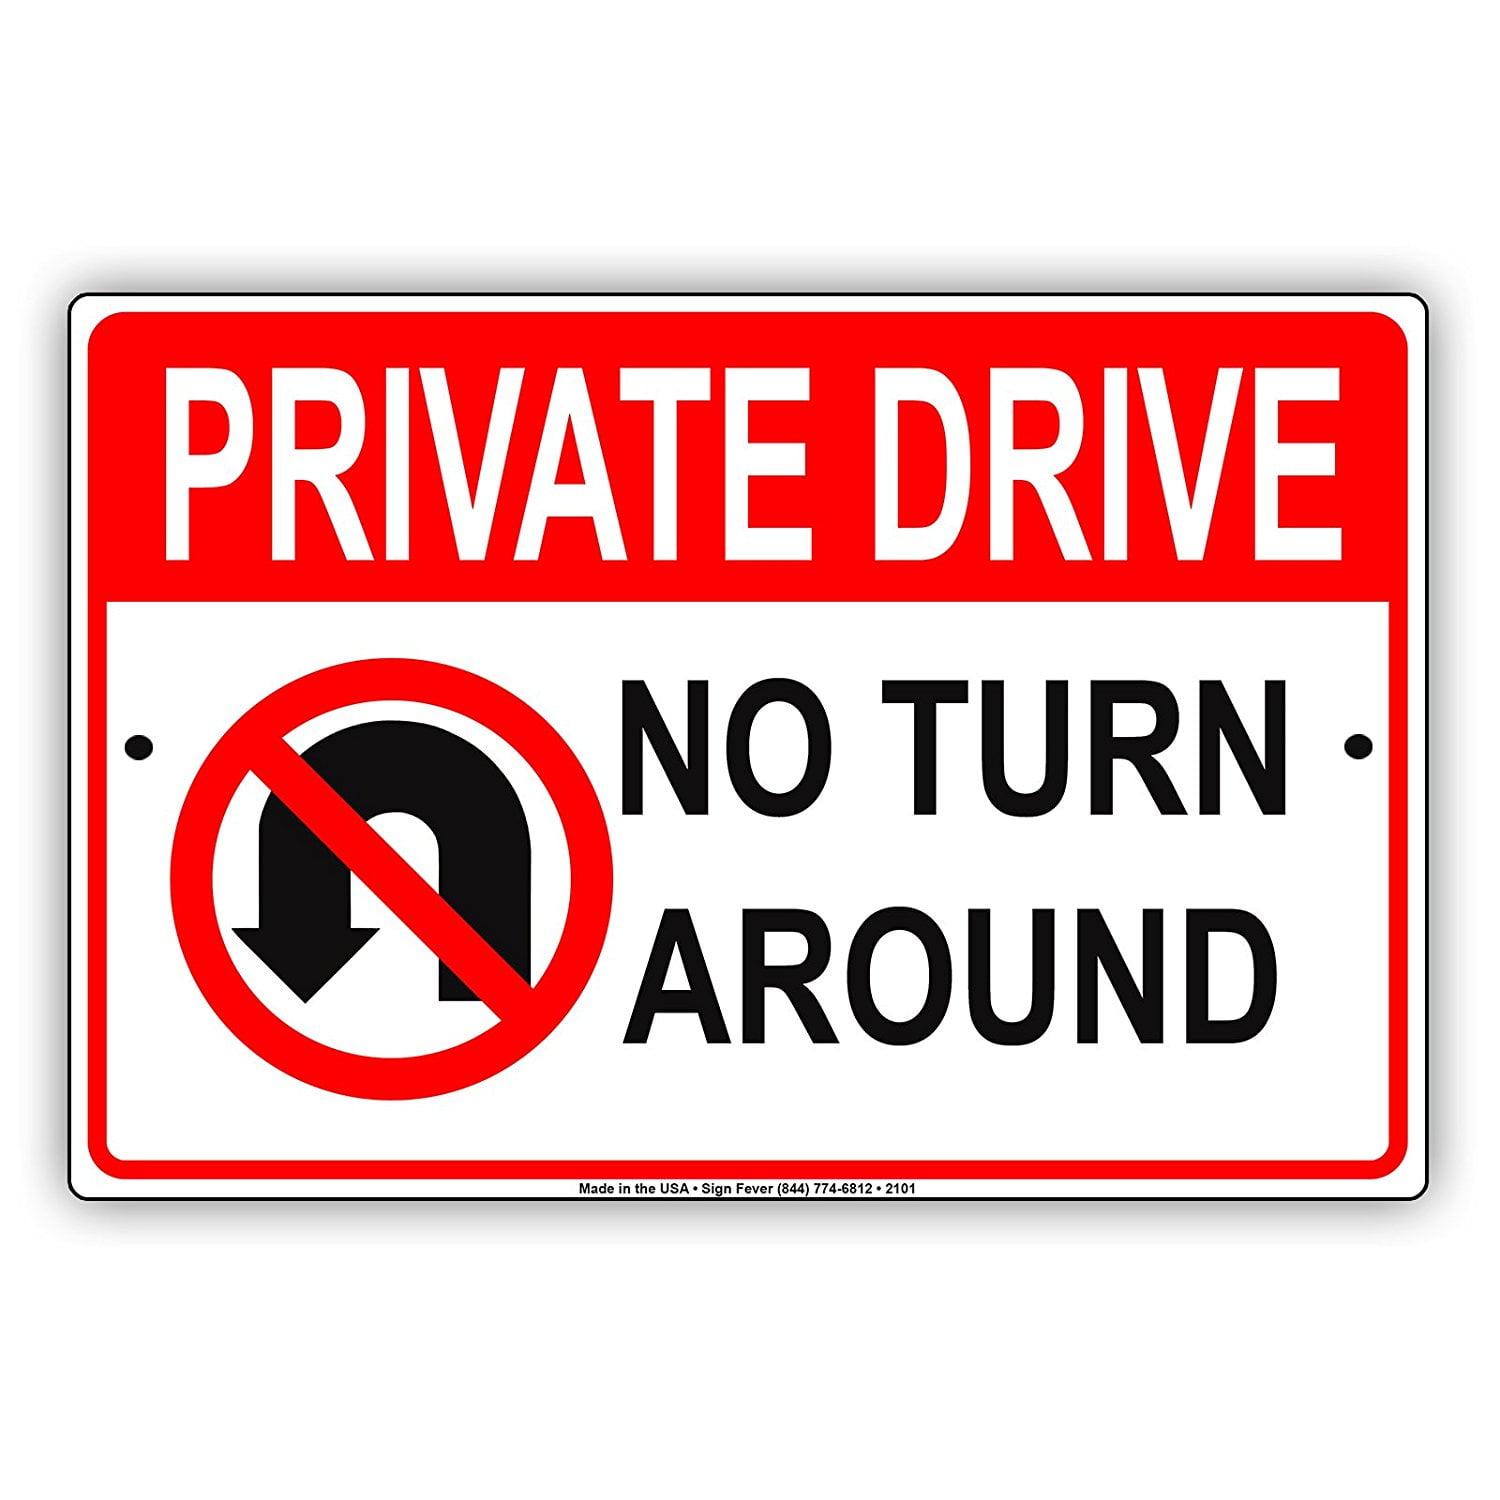 PRIVATE PROPERTY NO ENTRY Aluminium Reflective Plate Metal Sign 